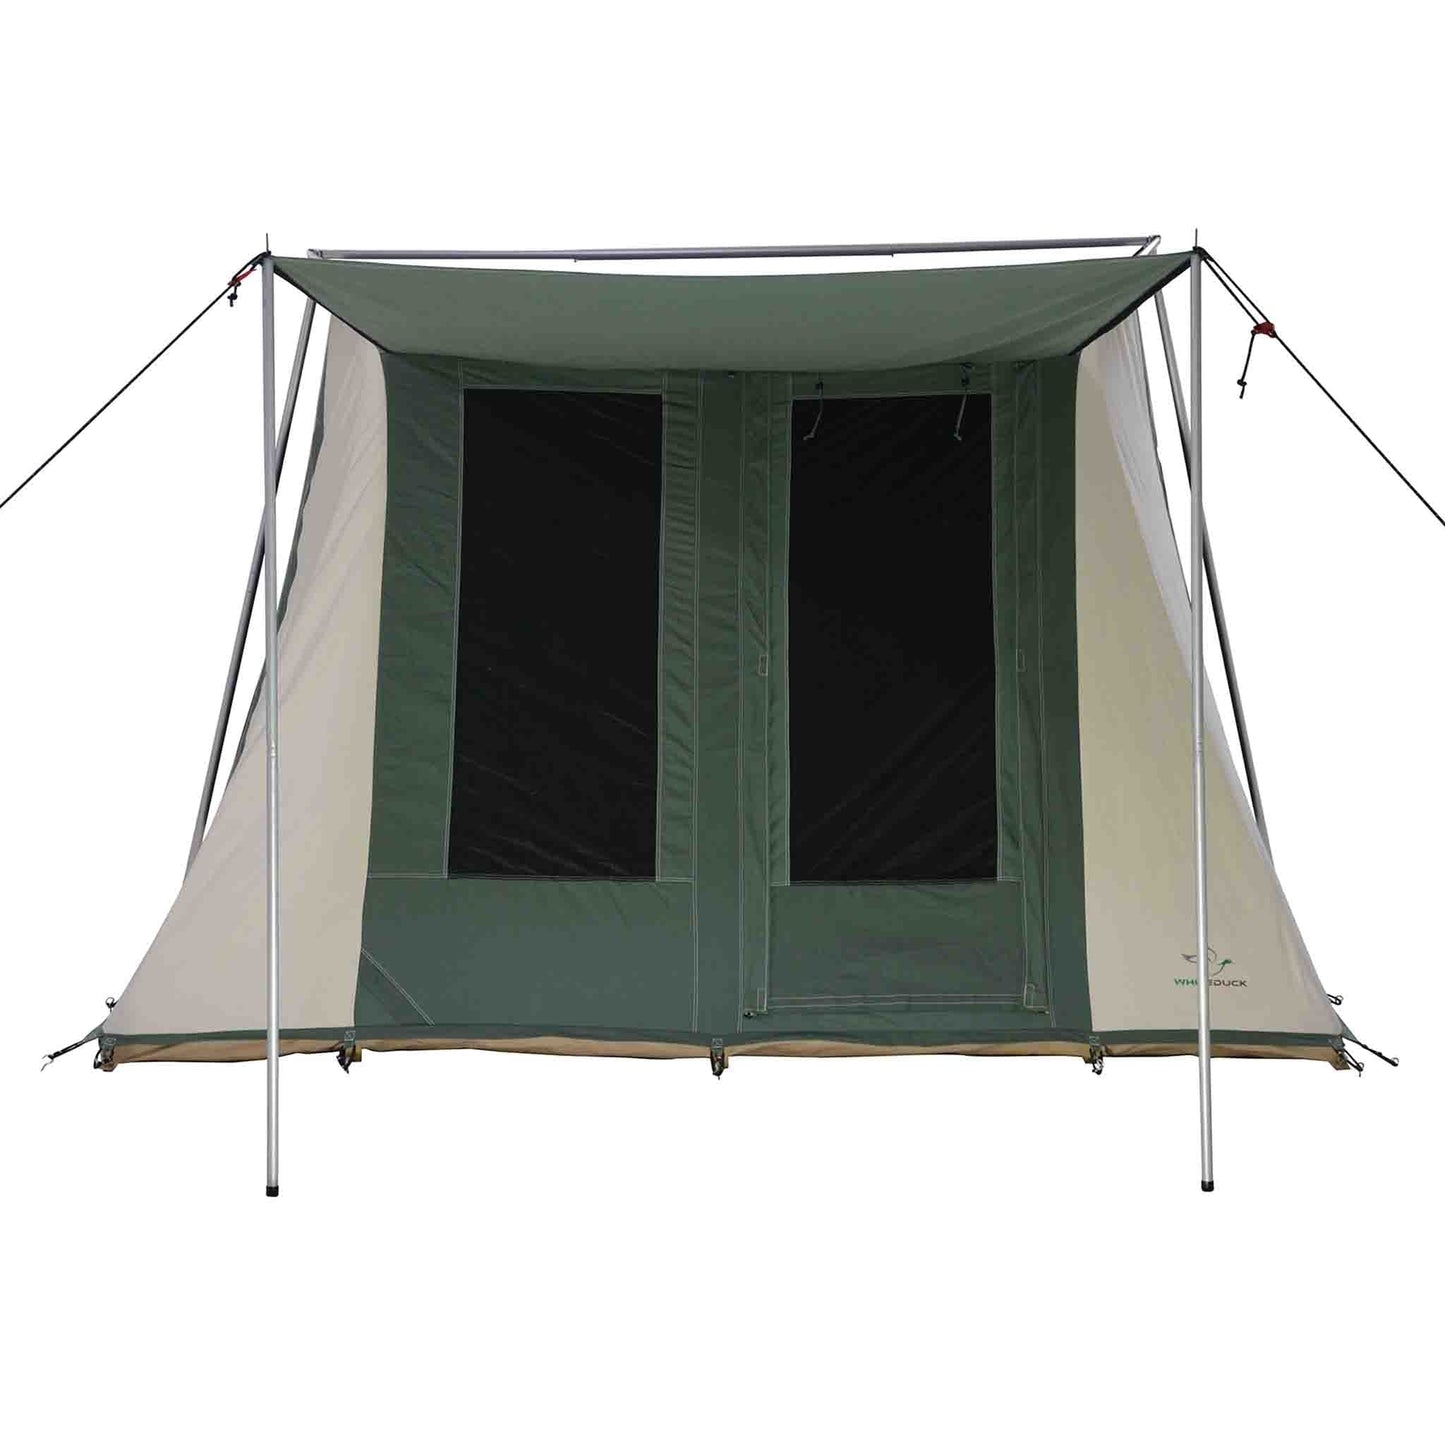 White Duck Outdoors White Duck Outdoors Prota Canvas Tent Standard/Deluxe - 10'x10'